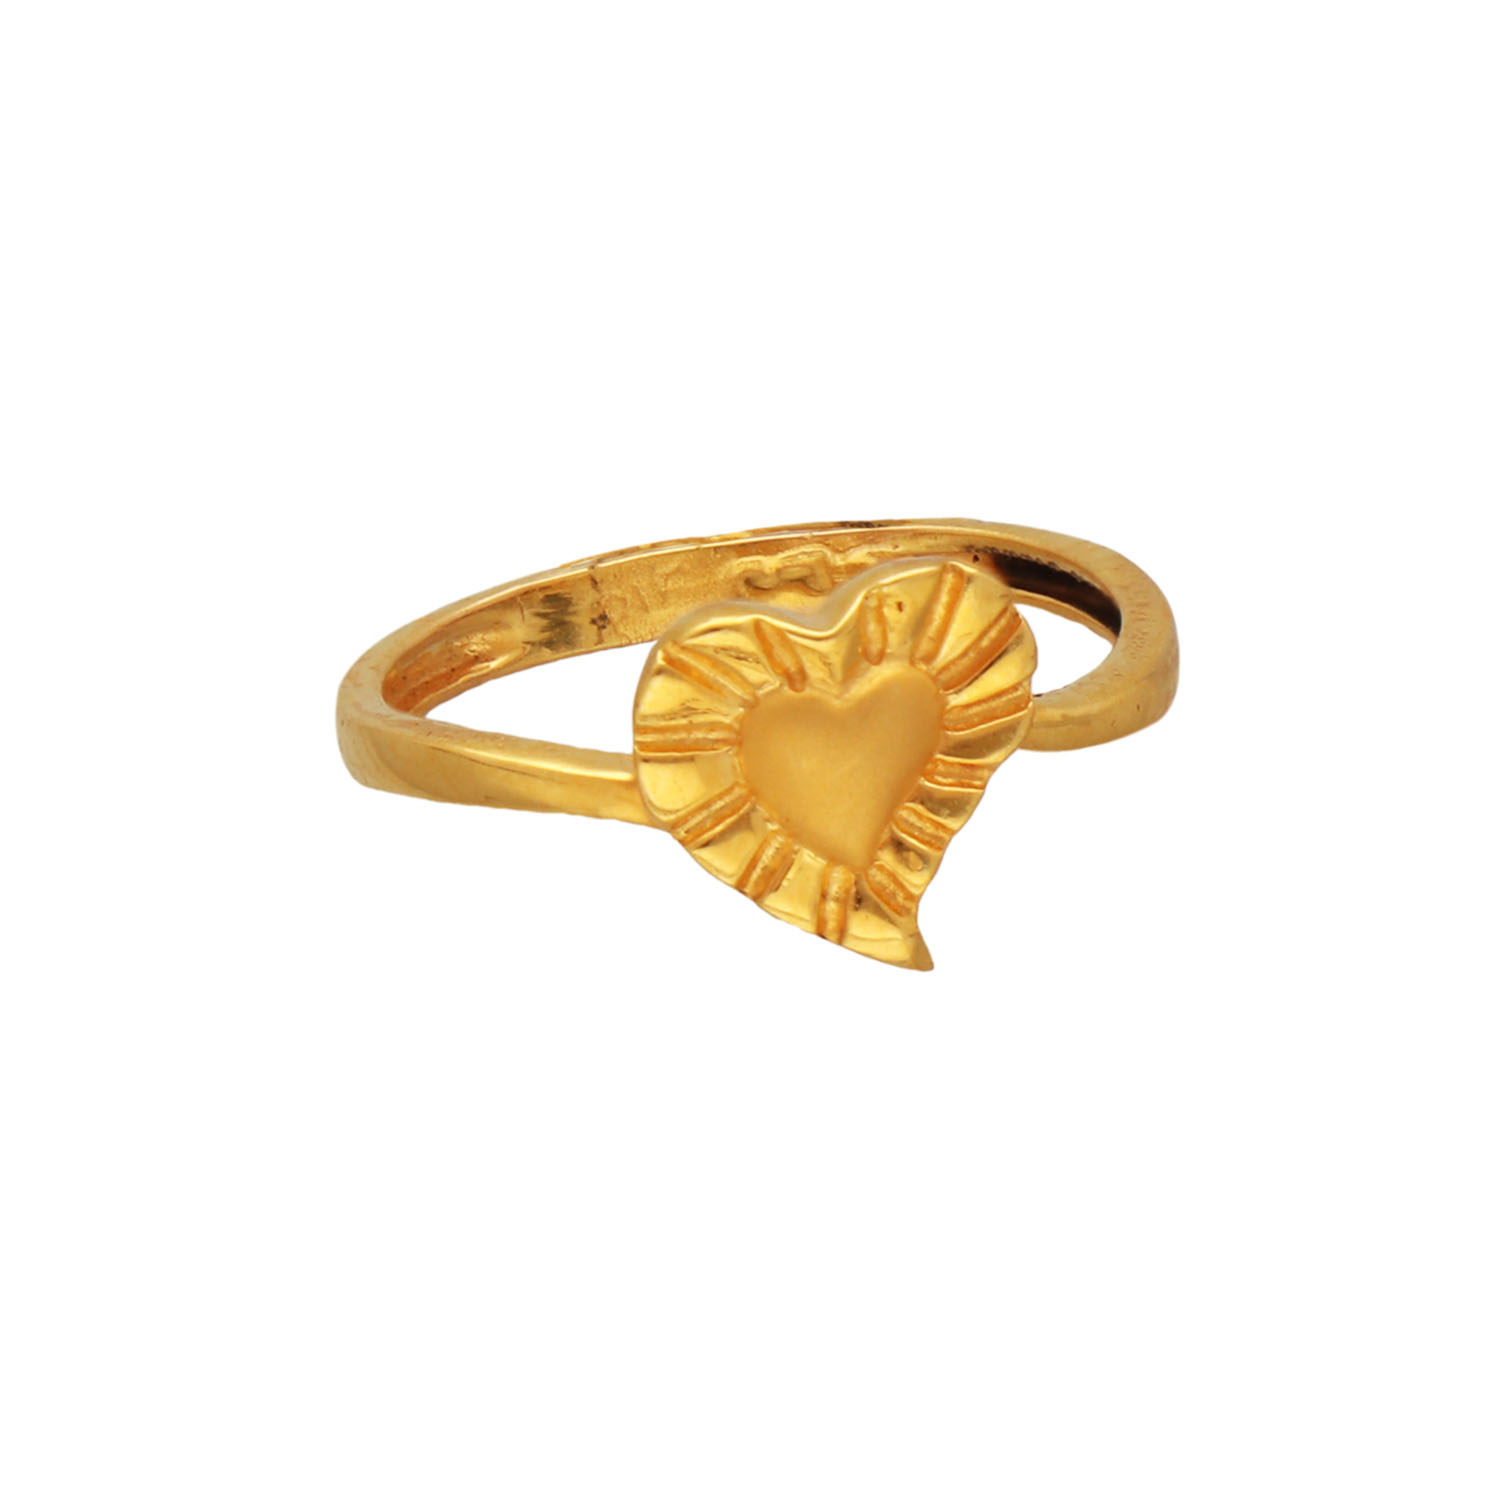 Buy Exclusive Finger Rings Online | Gold Rings | STAC Fine Jewellery